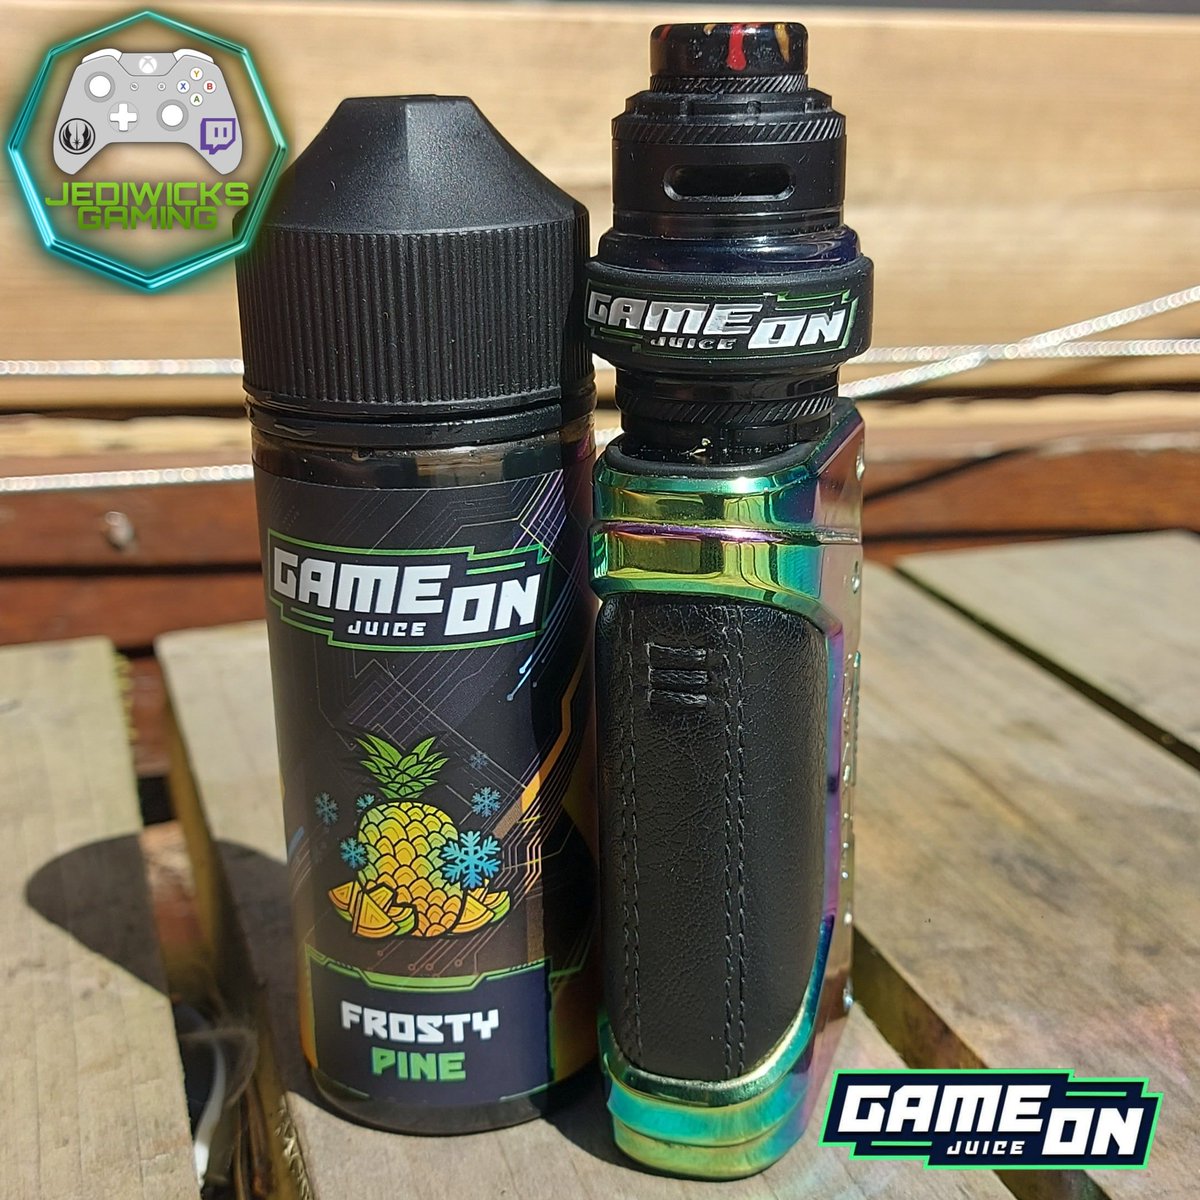 #suns out so I'm on the @GAMEONJUICE Frosty Pine. The perfect #vape for these #warm days.

#Order from gameonjuice.com/?ref=Jediwicks & use the #Discountcode JEDI to #save 10%

#gameon #GOJ #gameonjuice #vaper #gamer  #streamer #partner #uk